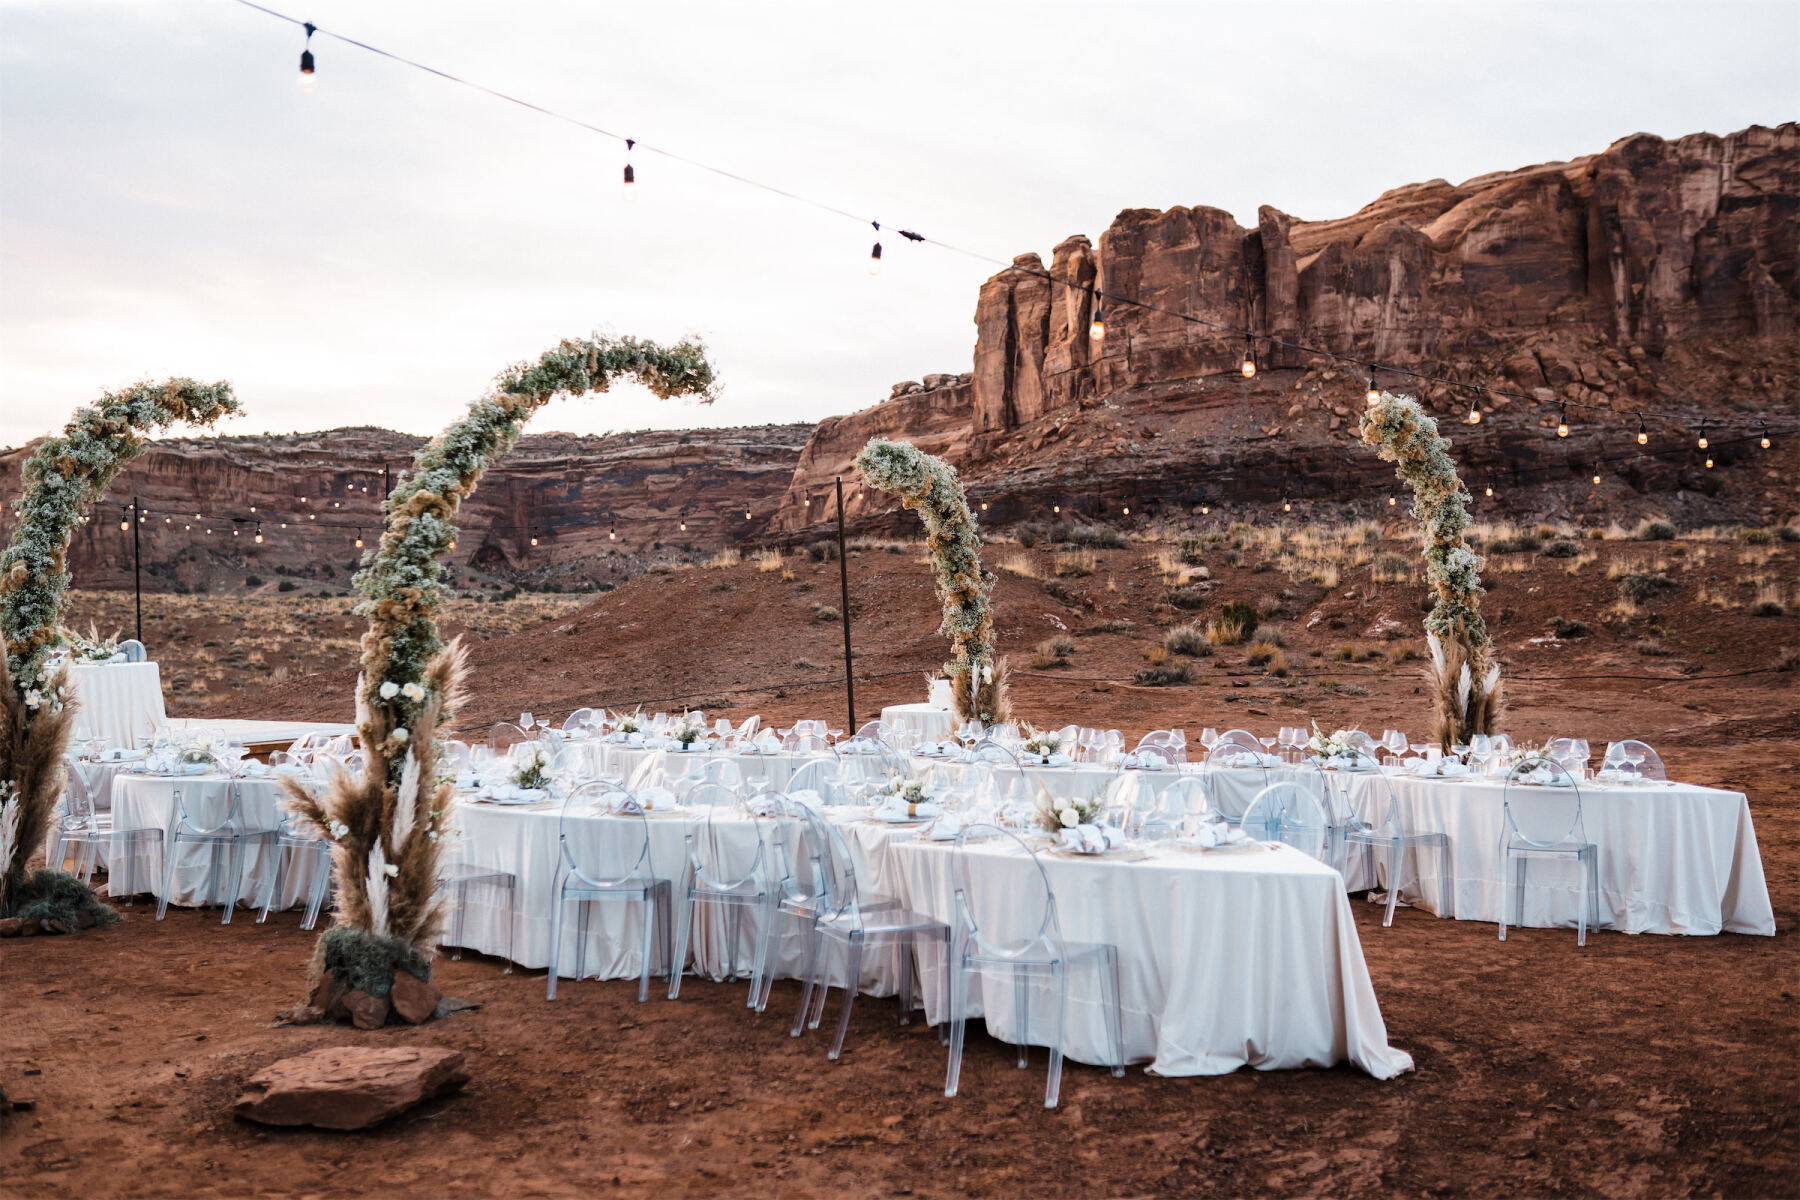 Serpentine tables added some visual interest during the open air reception at this desert wedding.